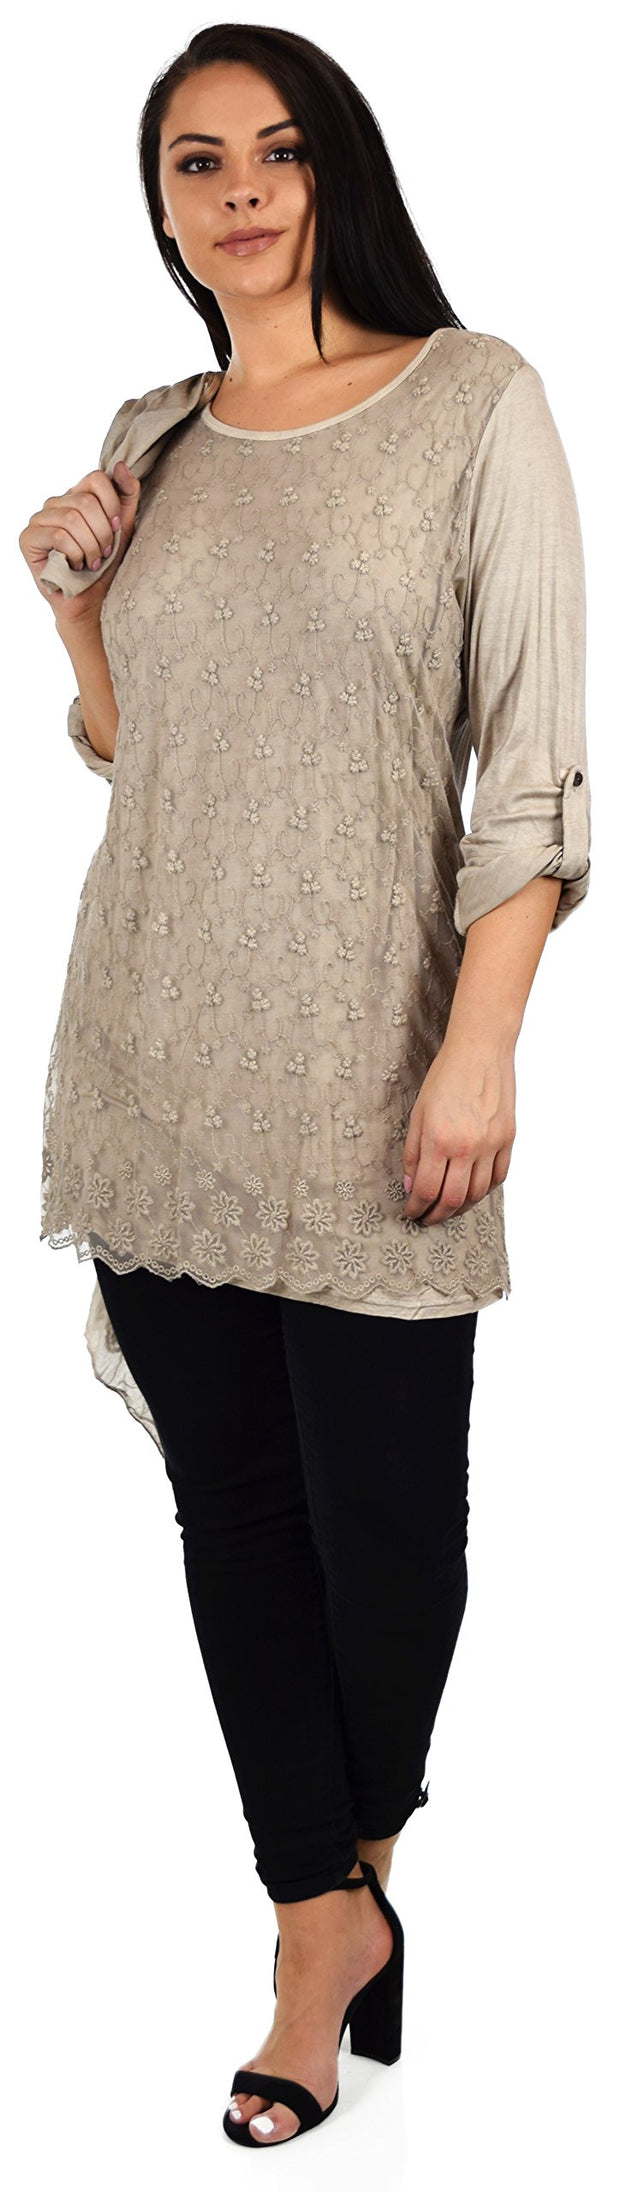 Desiner Tunic set, Women's 2 PC Netted Embroidered Lace Tunic set,  Blouse Top + Vest Set